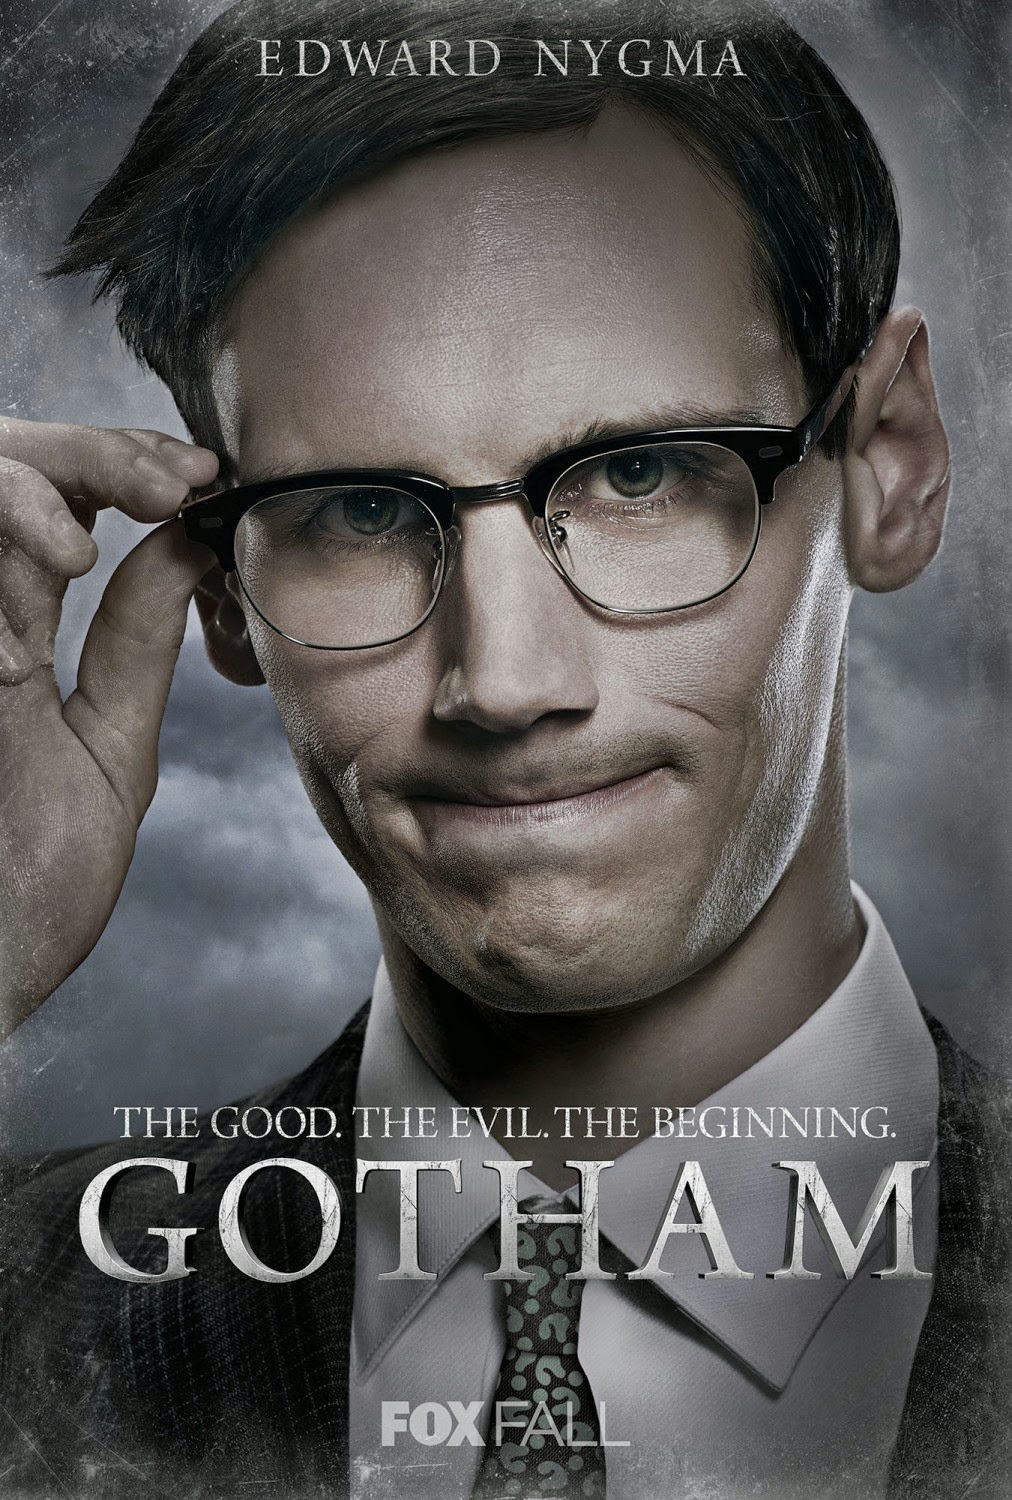 Gotham “The Good. The Evil. The Beginning.” Character TV Poster Set - Cory Michael Smith as Edward Nygma-The Riddler